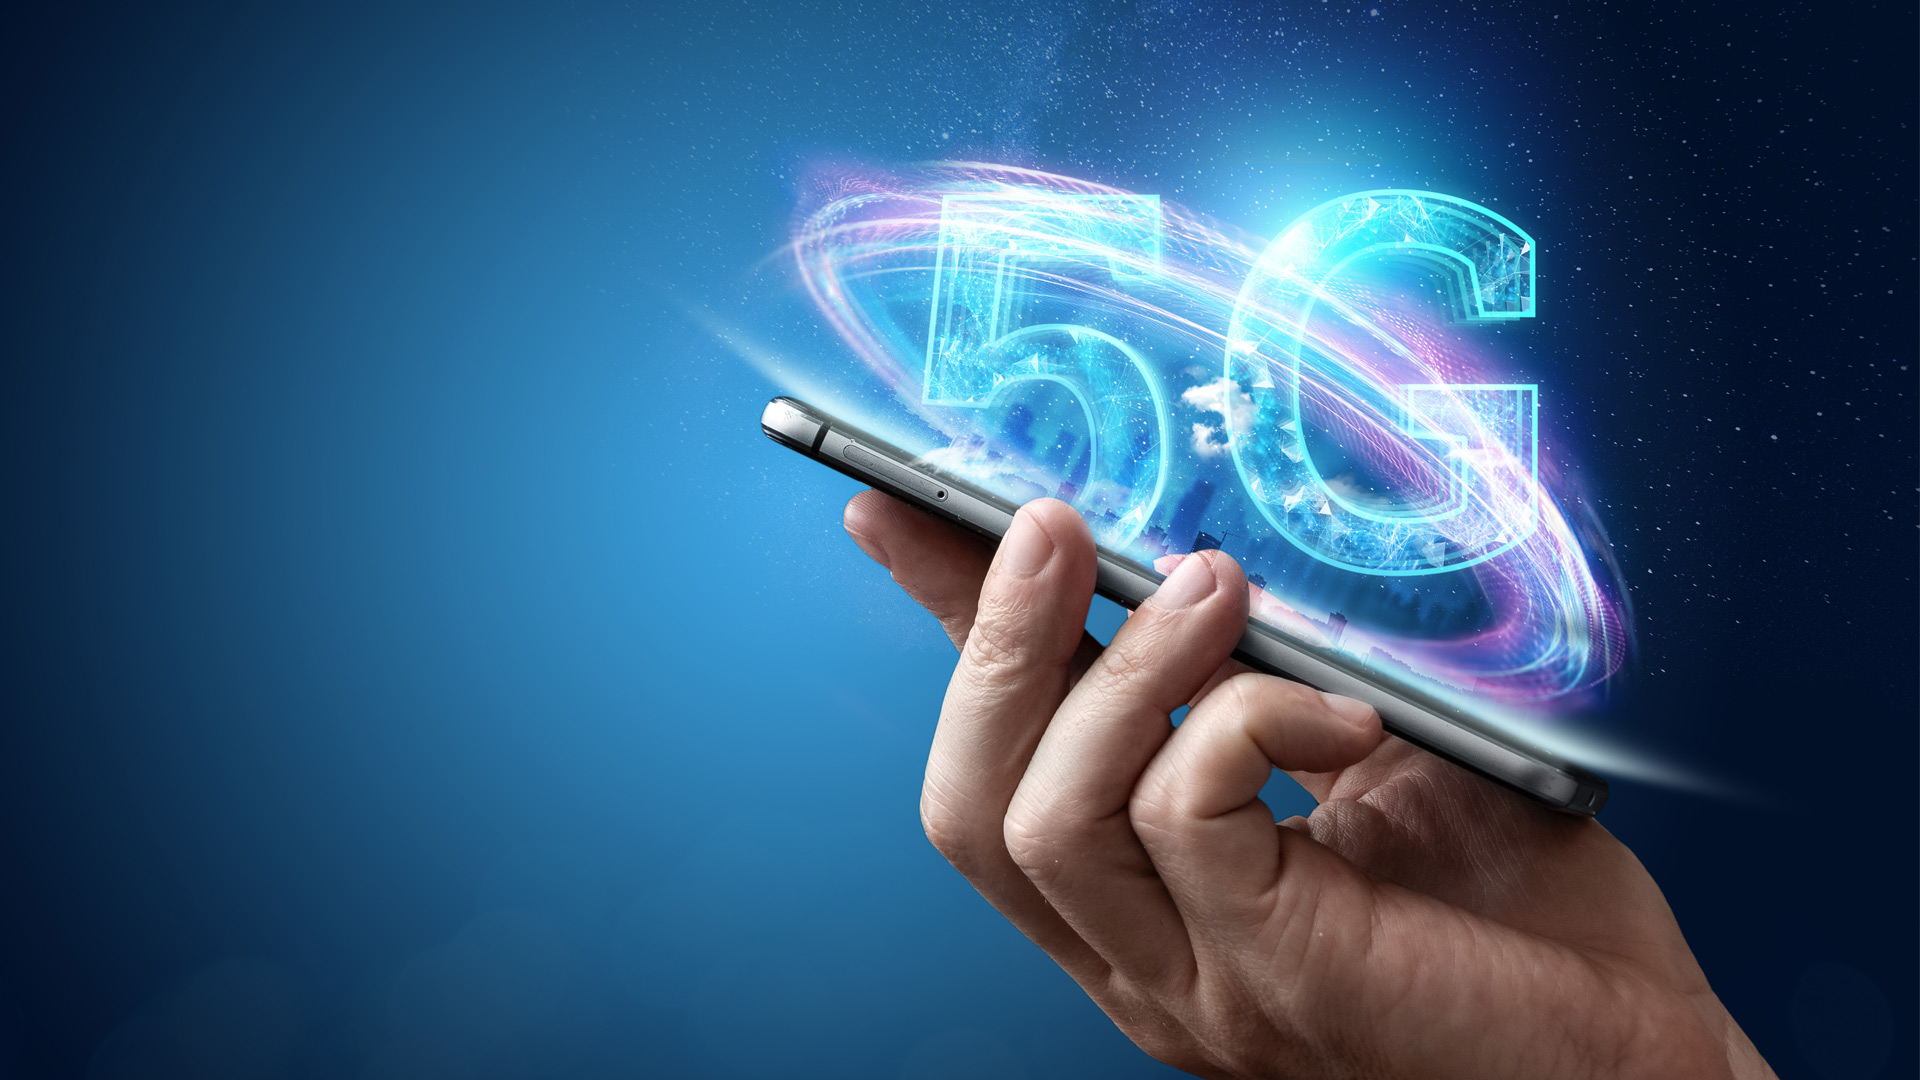 India’s race to rollout 5G begins